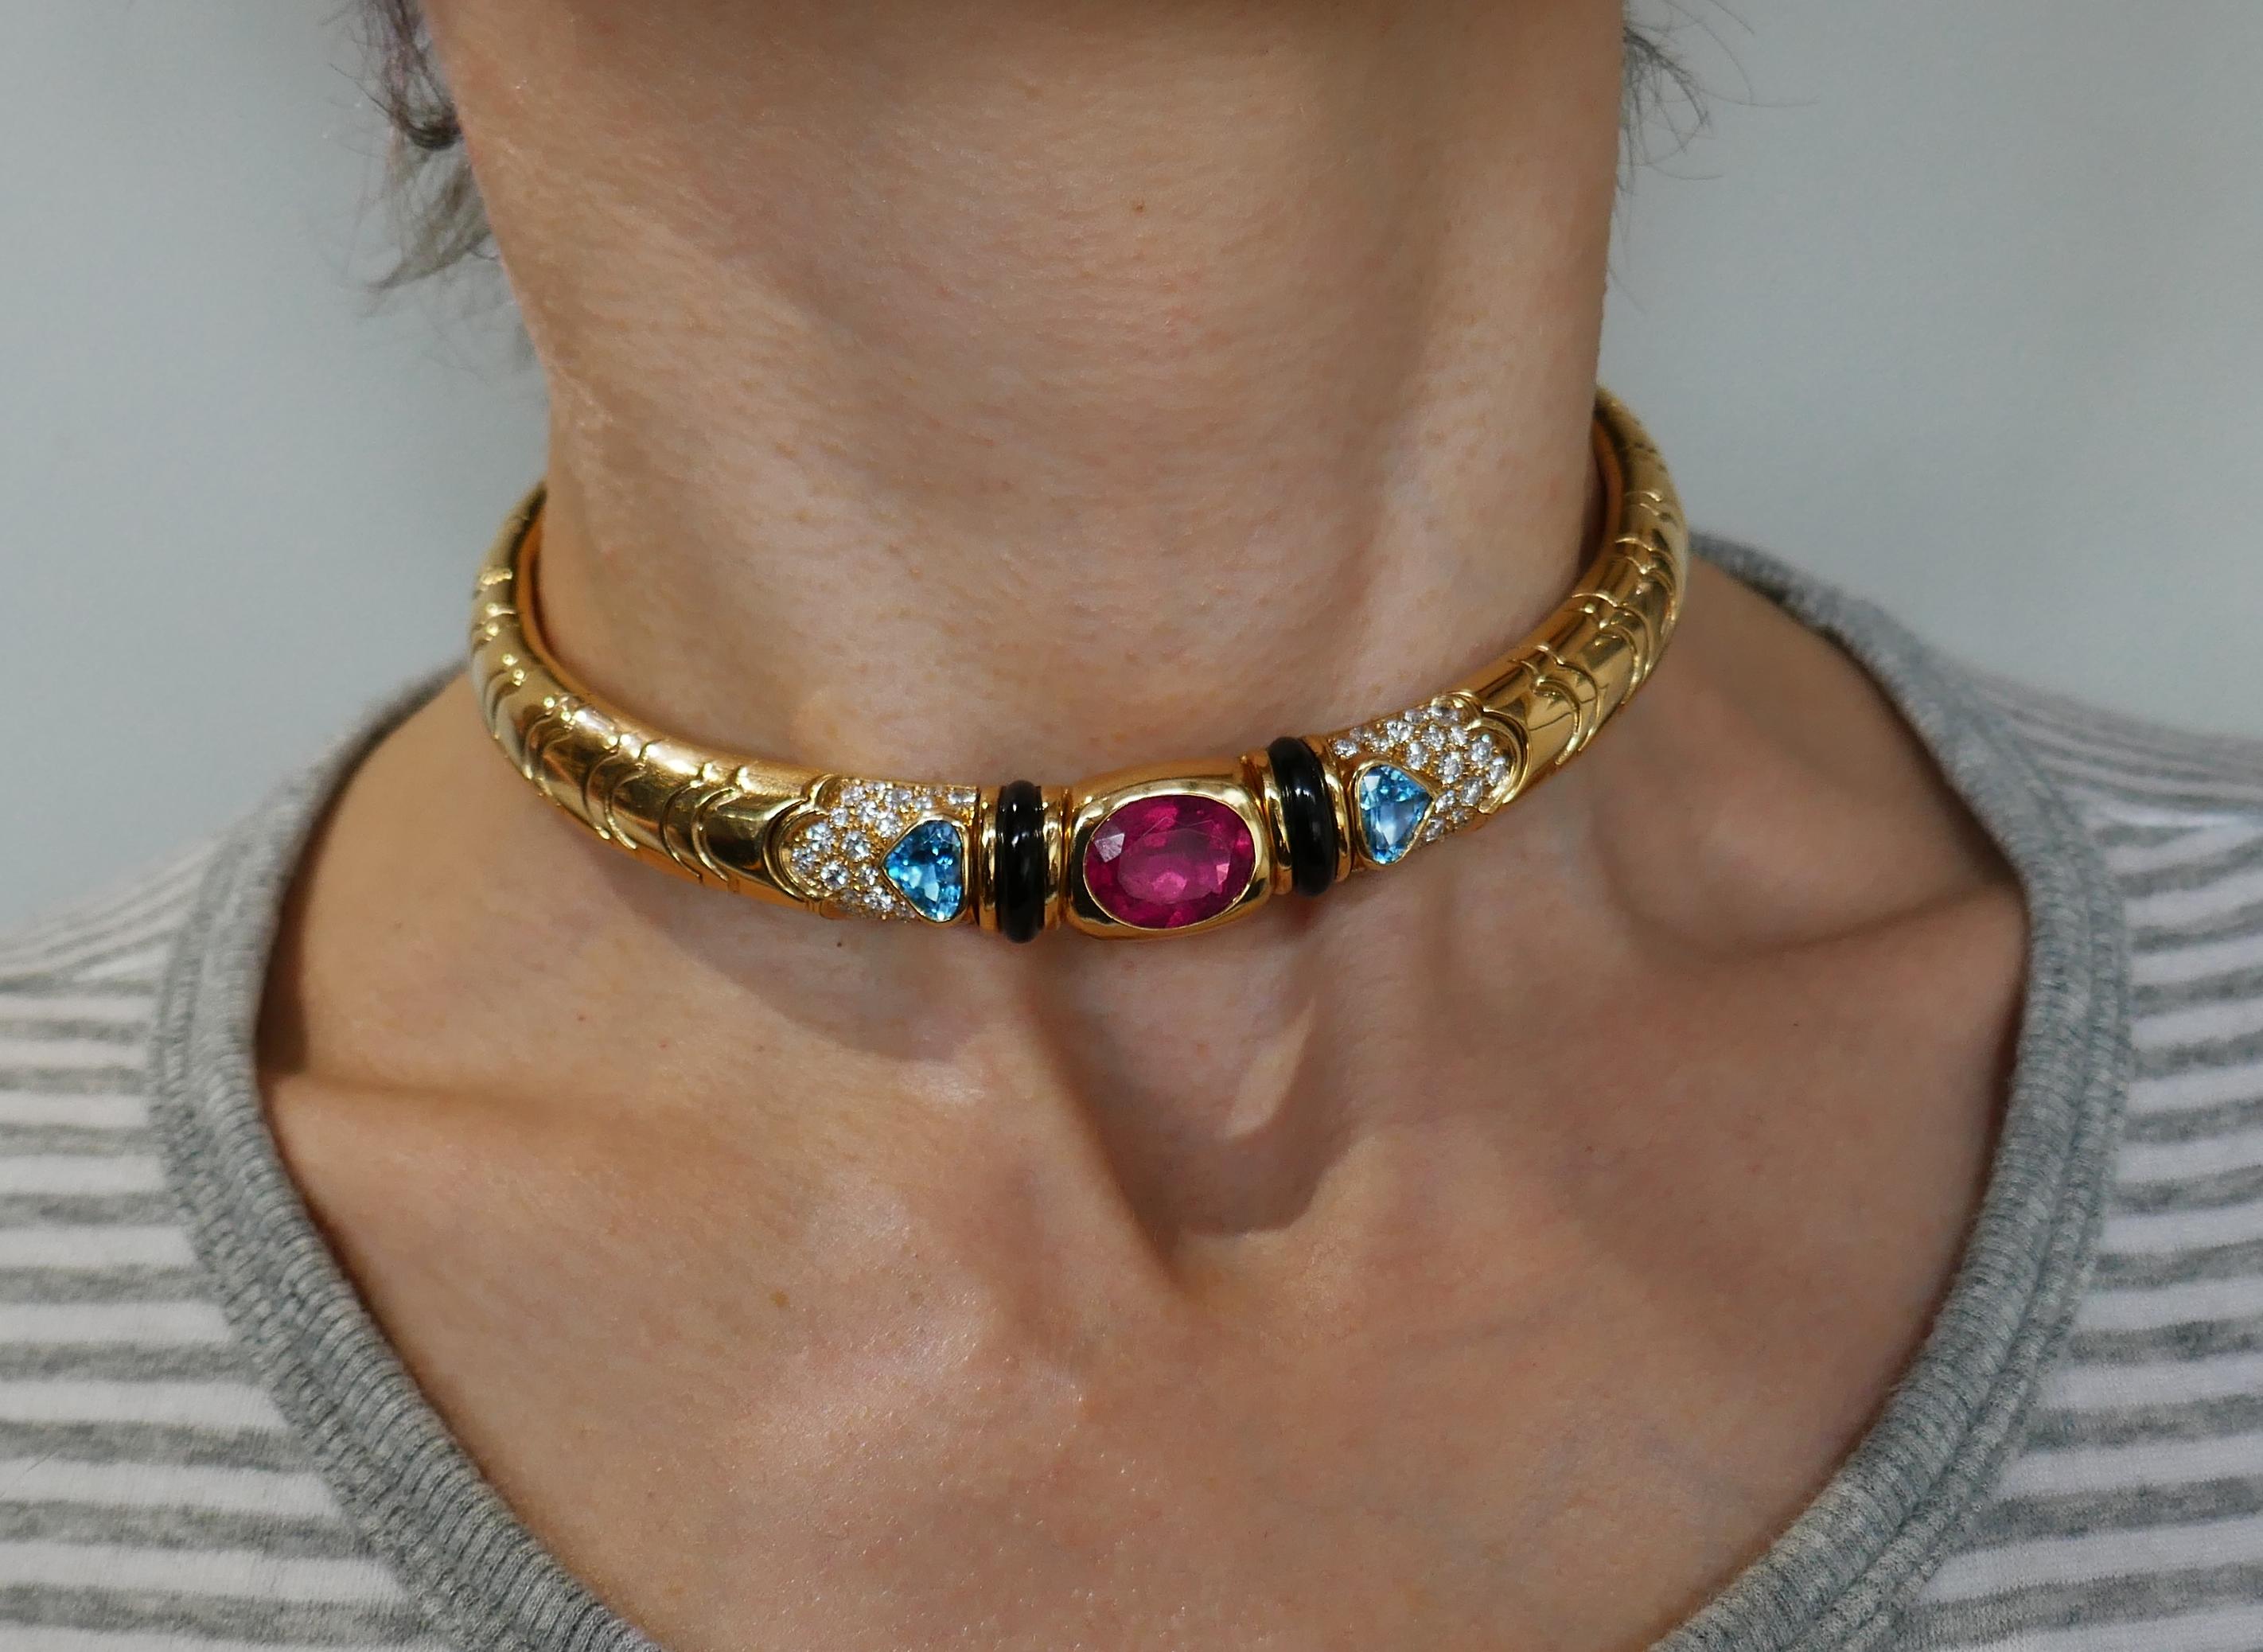 Colorful and chic choker necklace created by Marina B in 1980s. It definitely makes a statement! Elegant and wearable, the choker is a great addition to your jewelry collection. Features a faceted oval-shape pink tourmaline set in 18 karat yellow